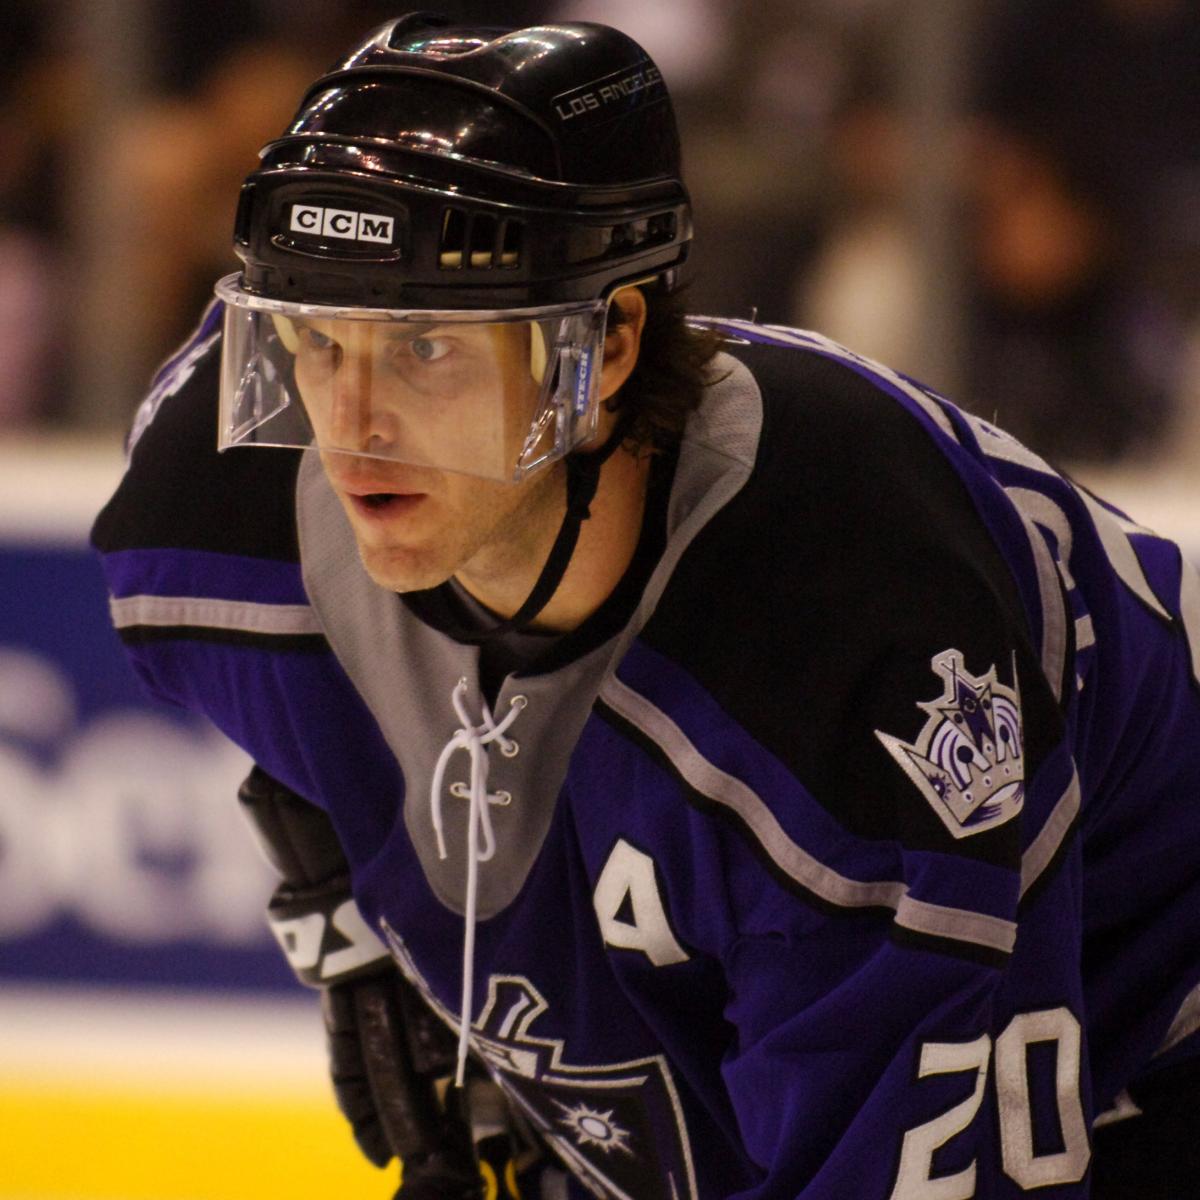 Luc Robitaille's Los Angeles Kings Are the First NHL Team in Metaverse